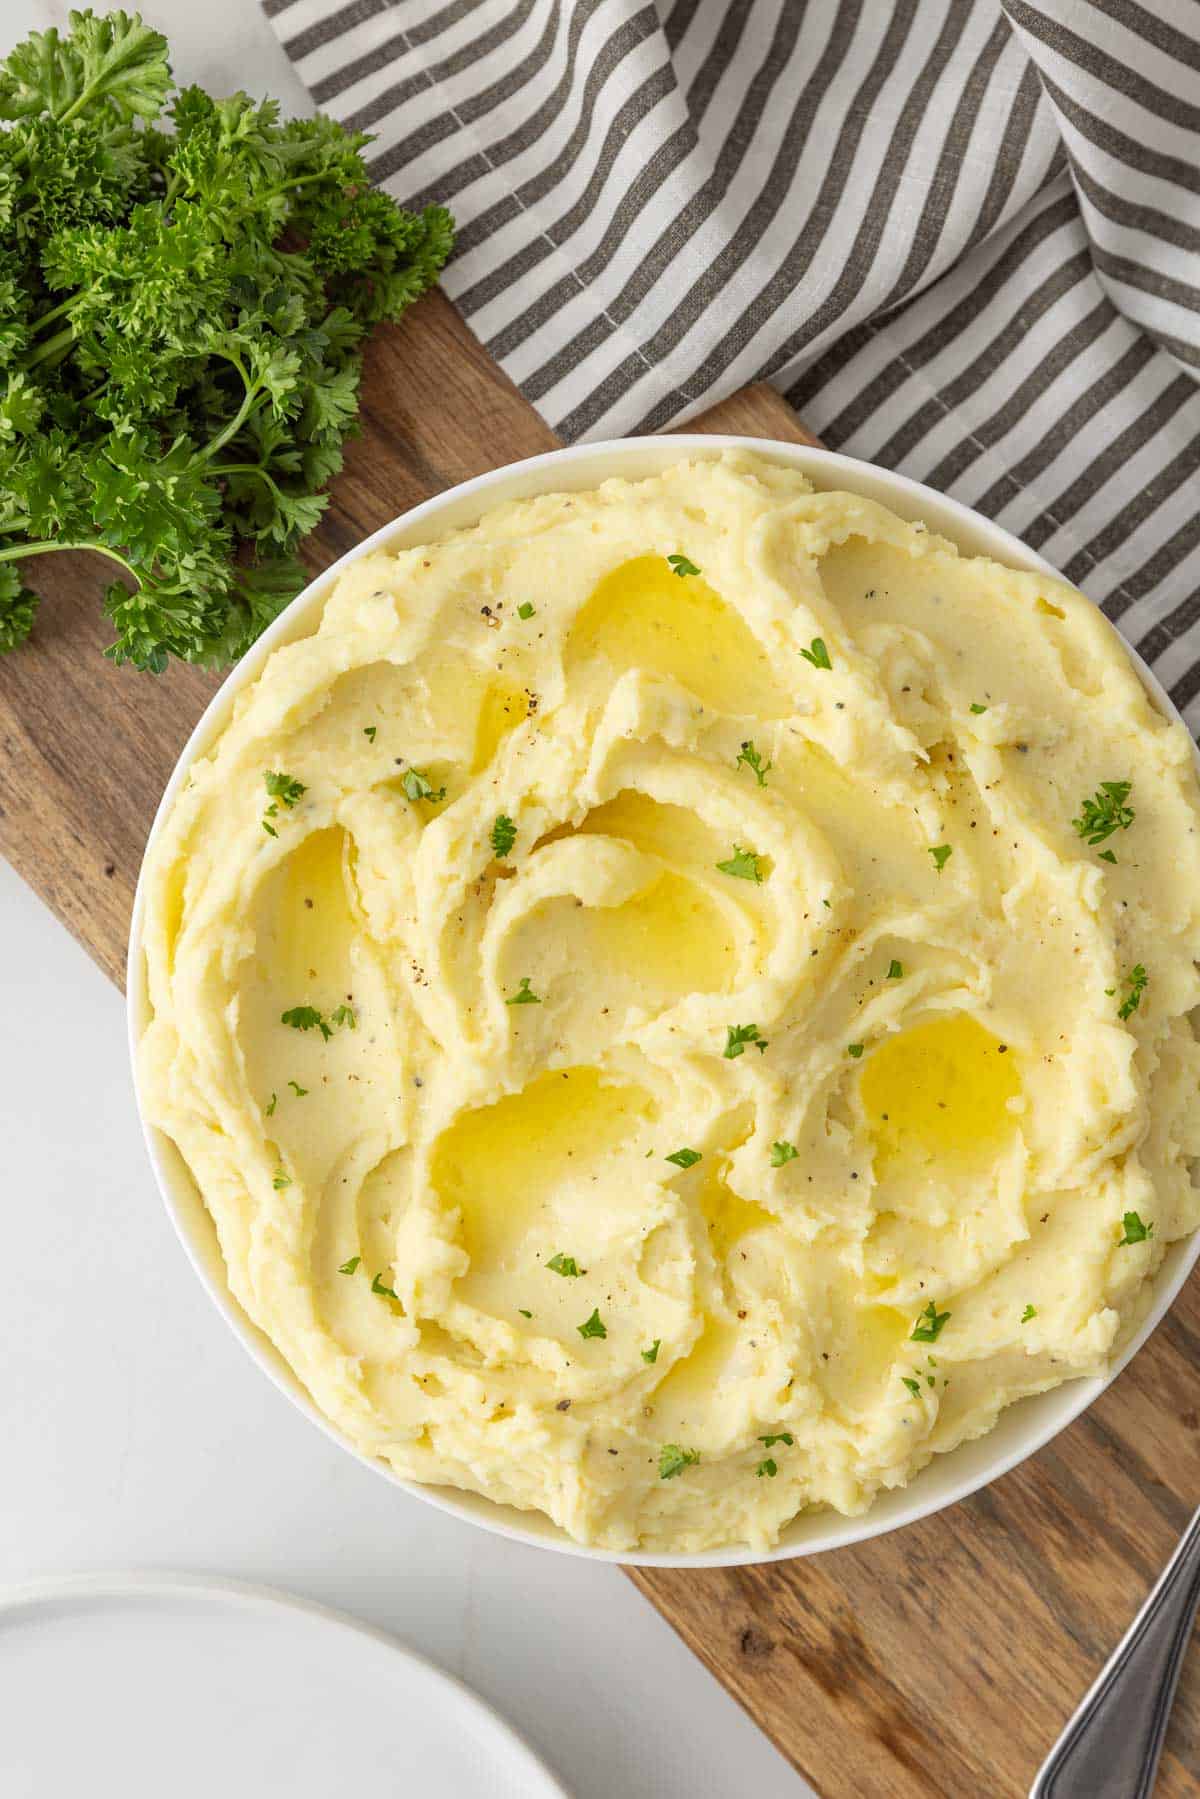 Overhead view of a bowl of cream cheese mashed potatoes sprinkled with parsley.